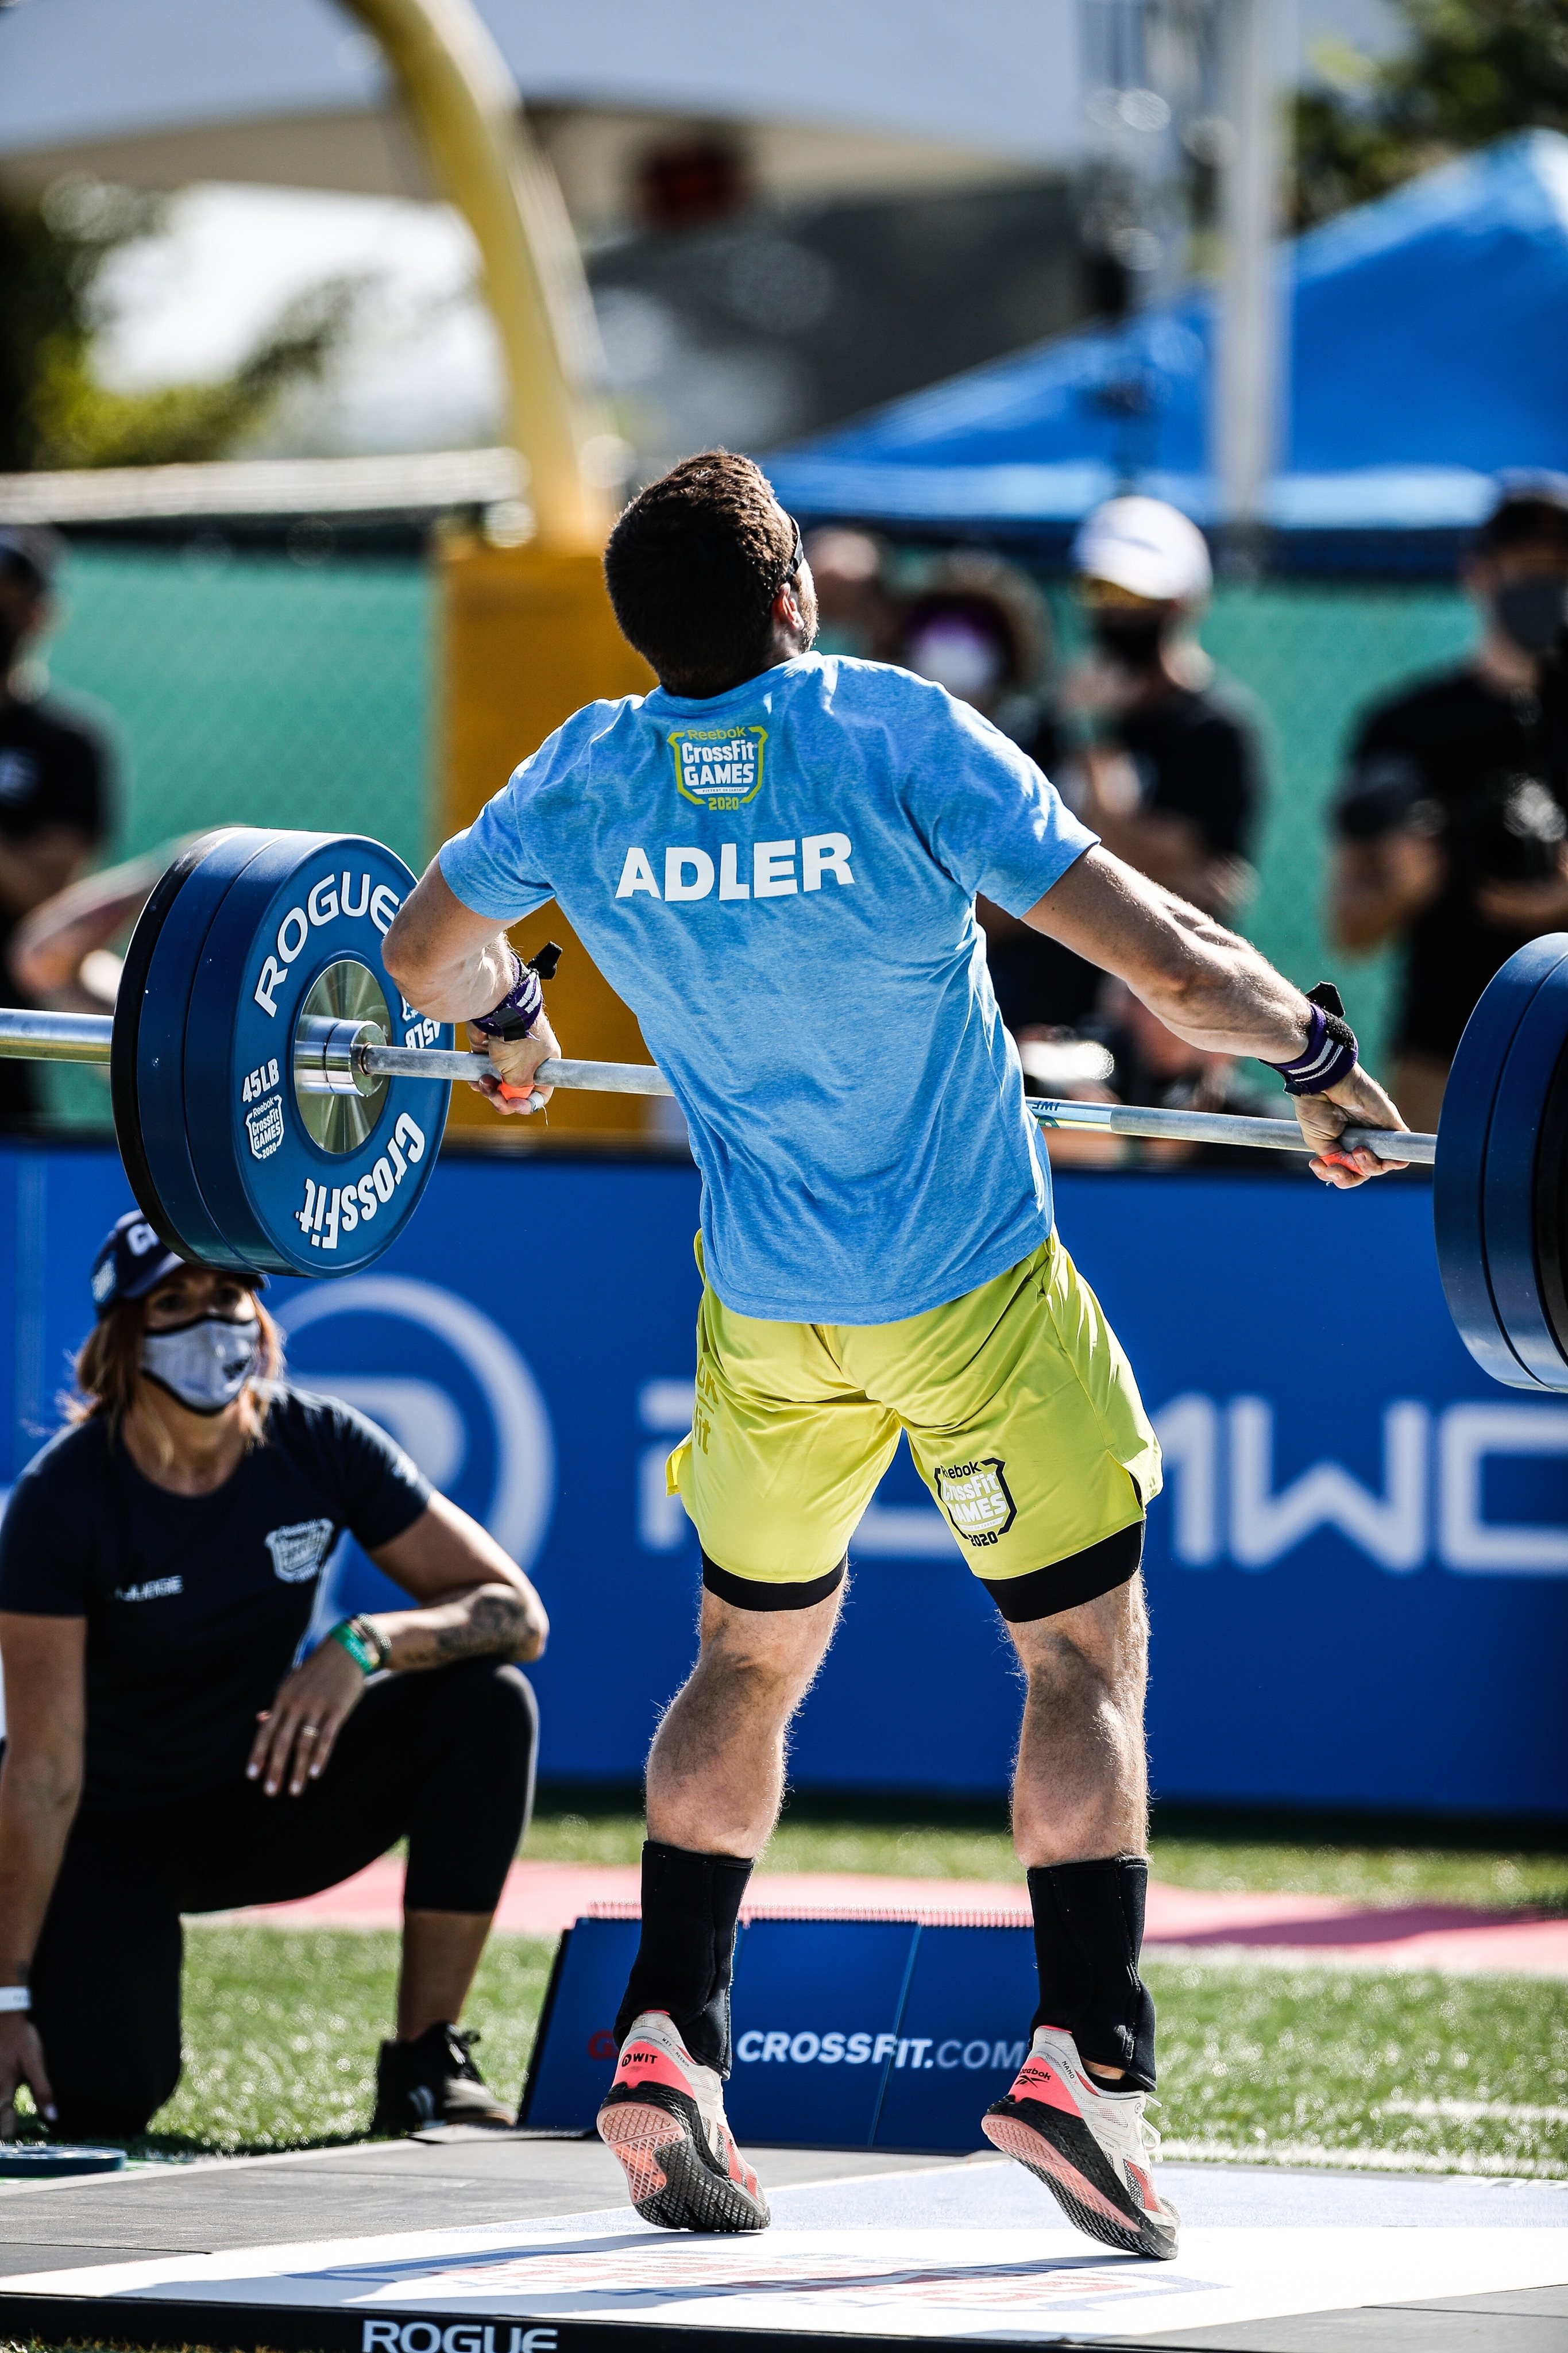 Jeffrey Adler now finds himself in front of the competition for the 2021 CrossFit season. Photo: CrossFit Games